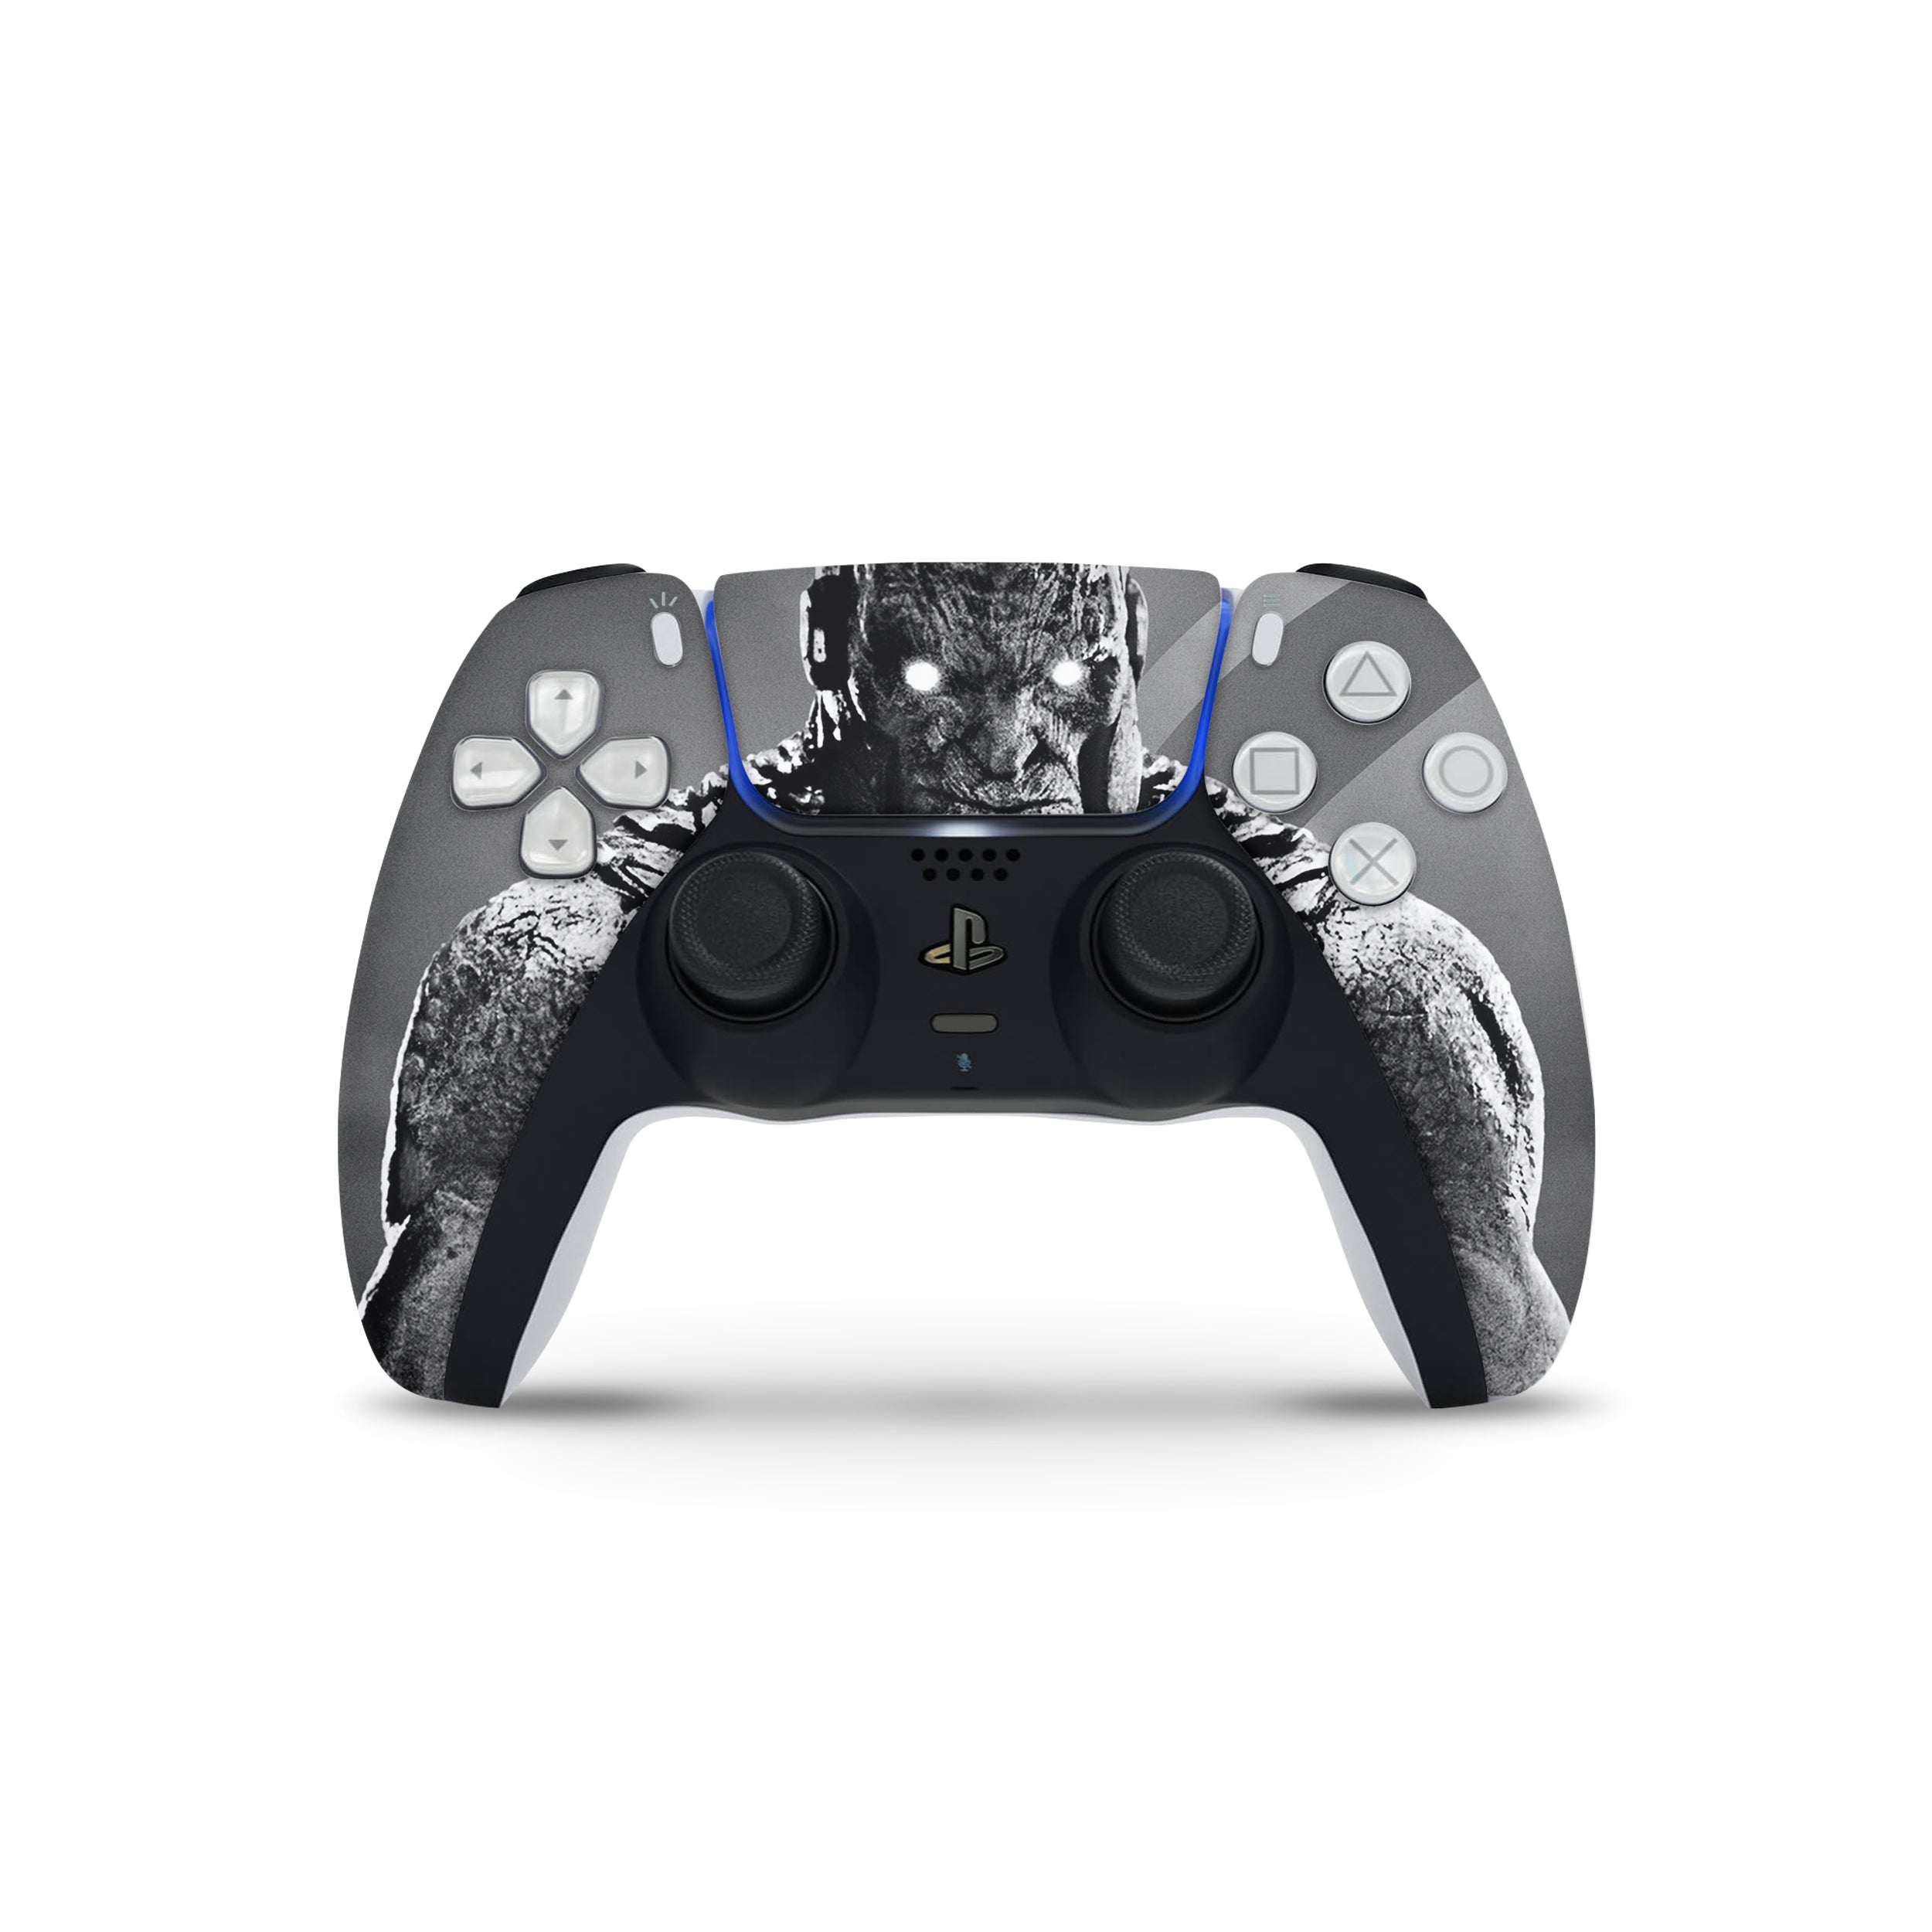 A video game skin featuring a DC Comics Darkseid design for the PS5 DualSense Controller.